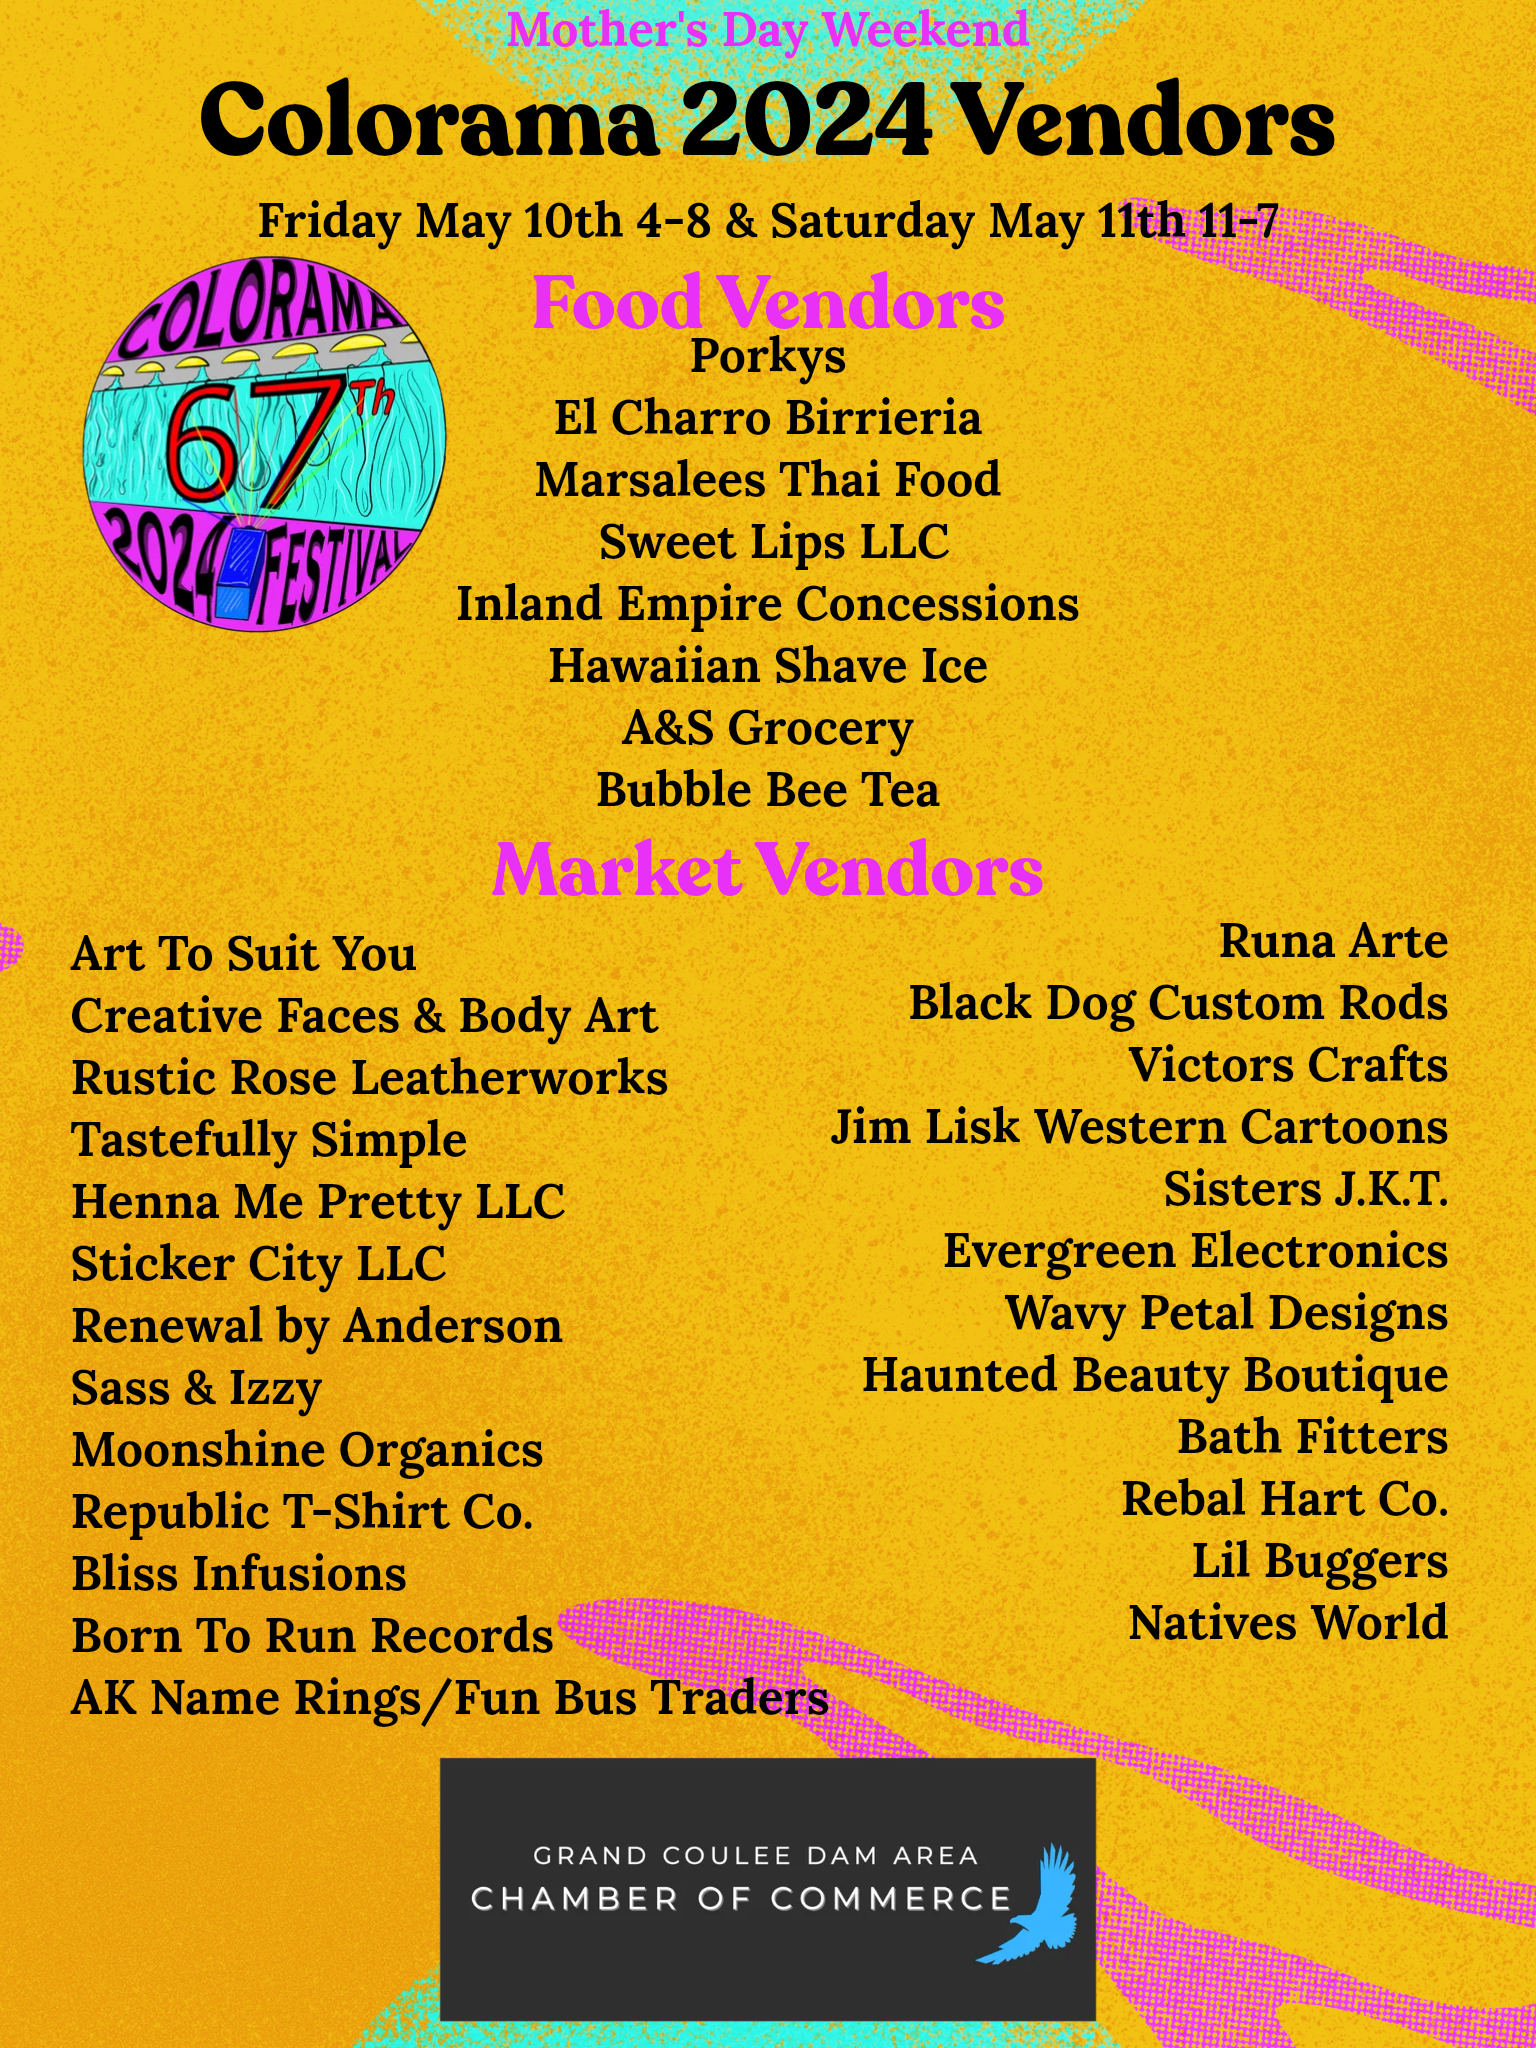 Colorama 2024 Vendors - Updated 4_26.png